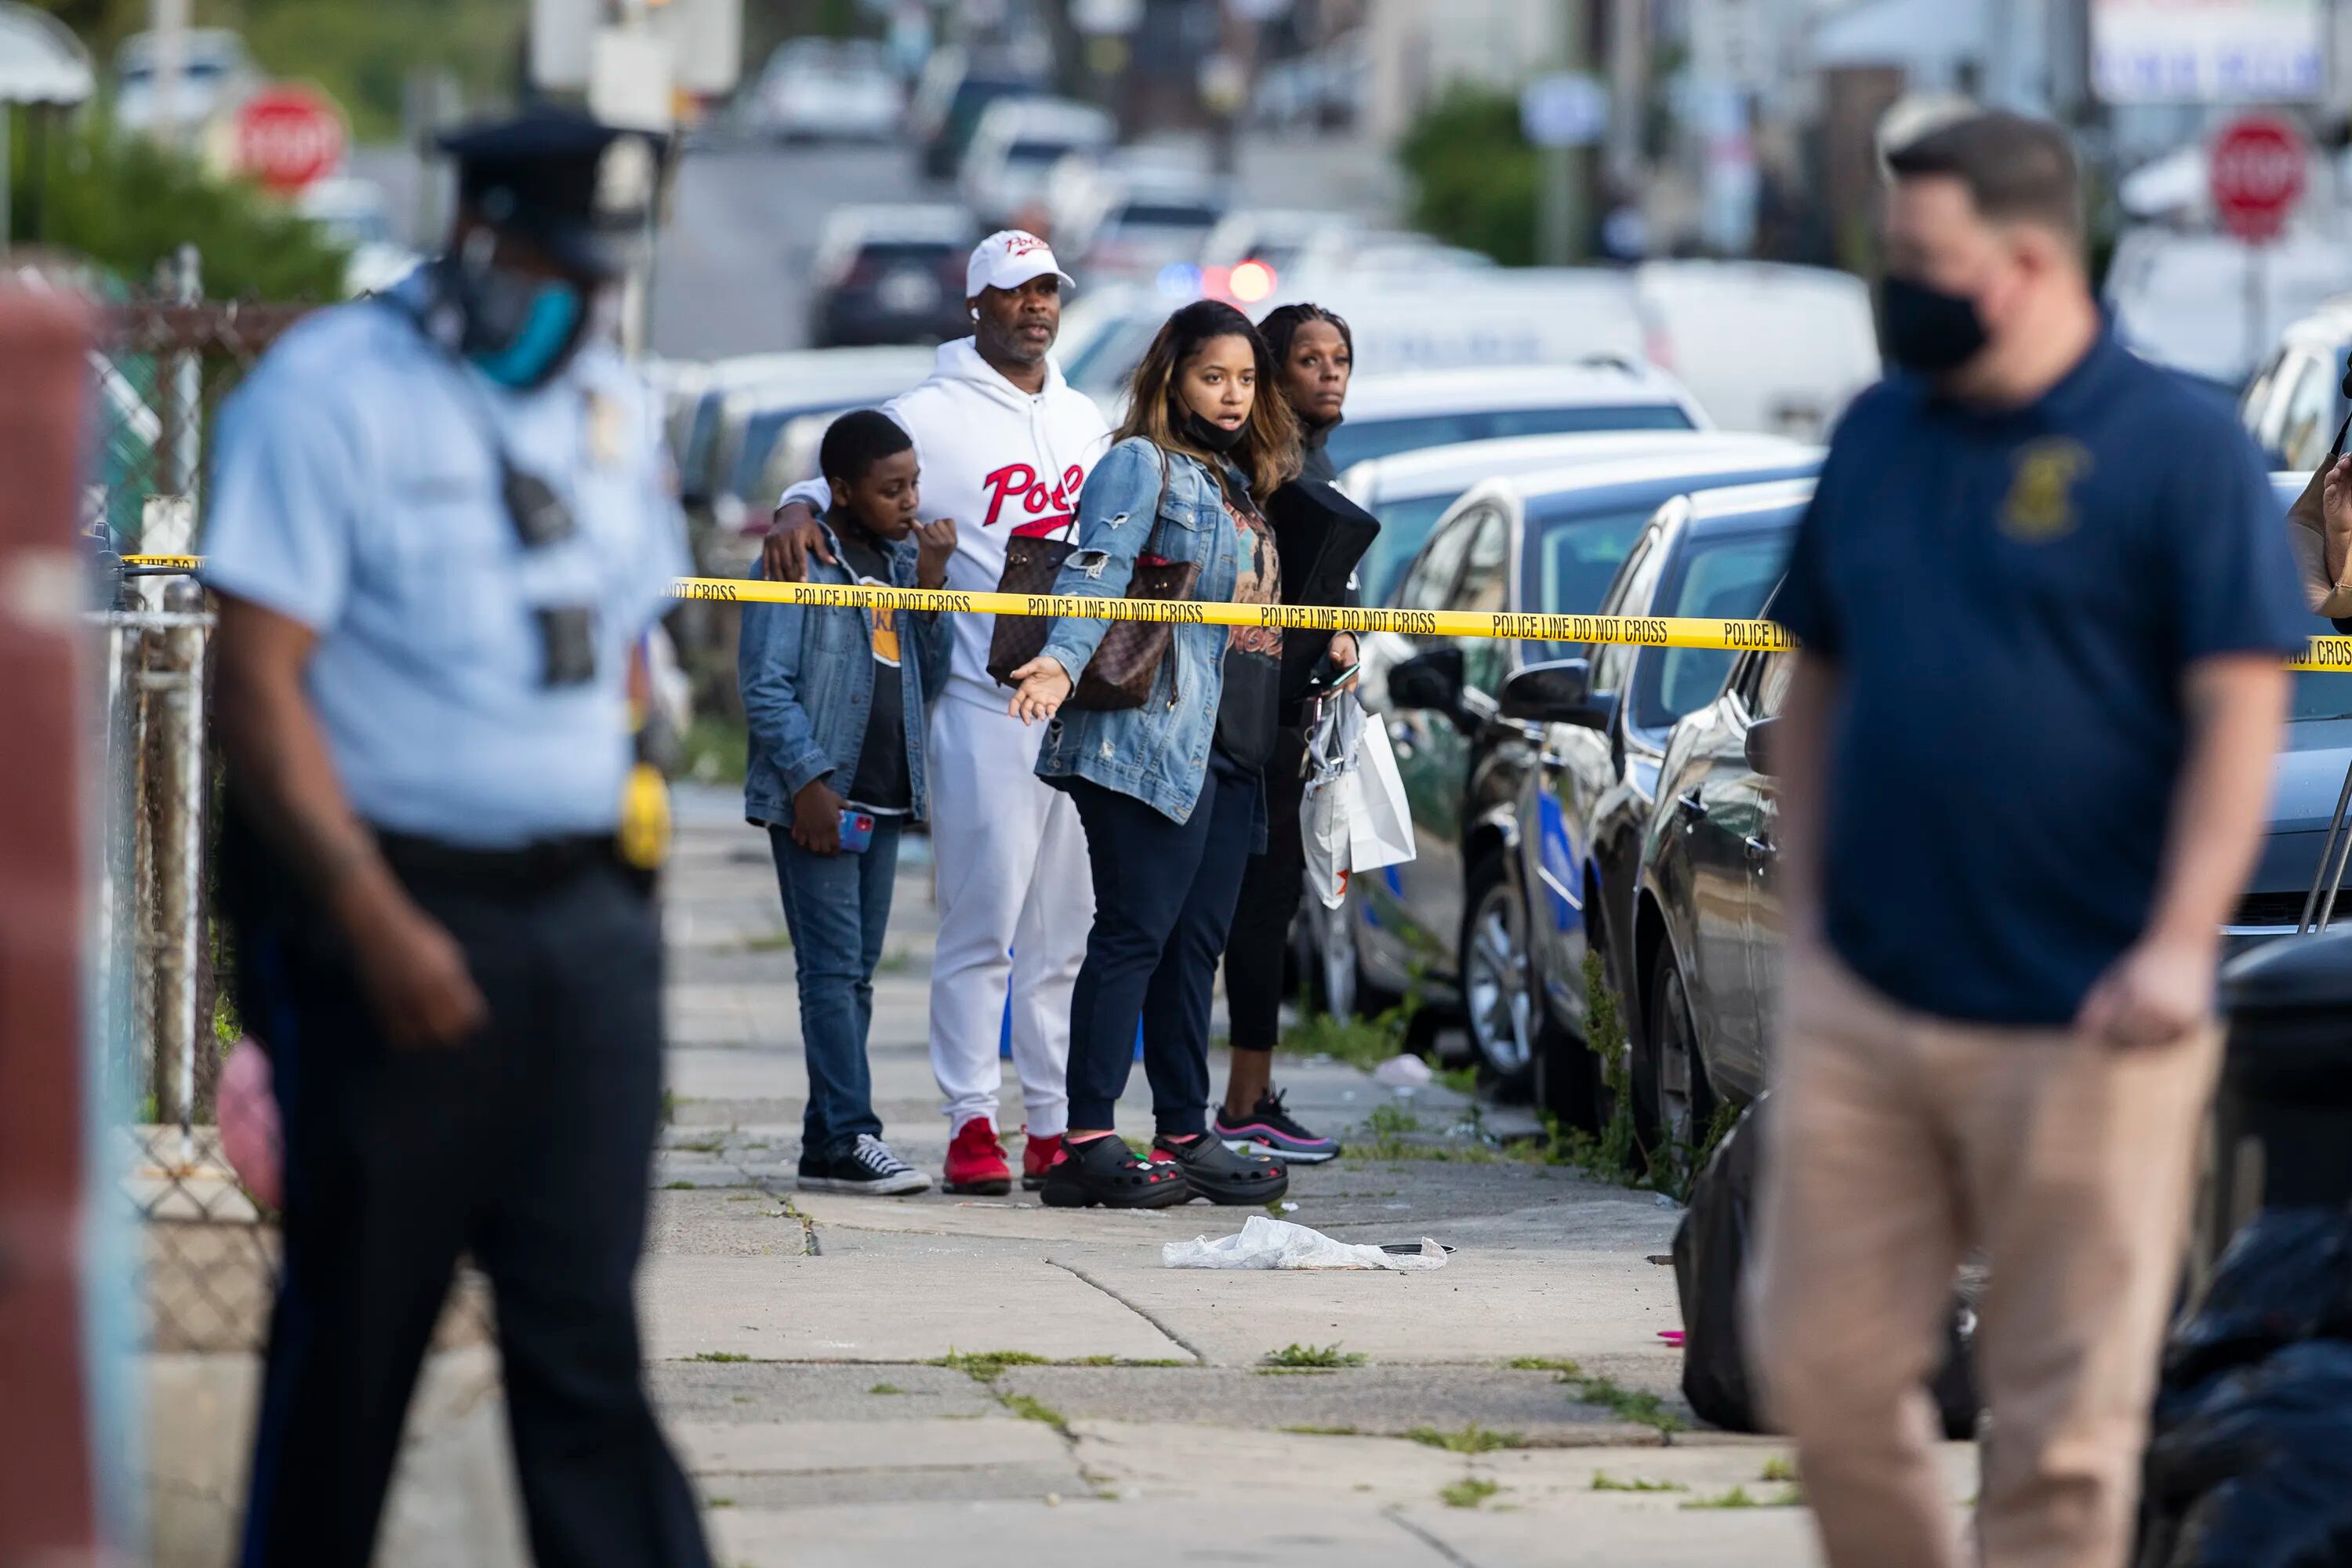 A shooting left one dead and four wounded at South 55th and Kingsessing Avenue on May 12, 2021. Onlookers stop at the scene, which extended south on 55th Street.